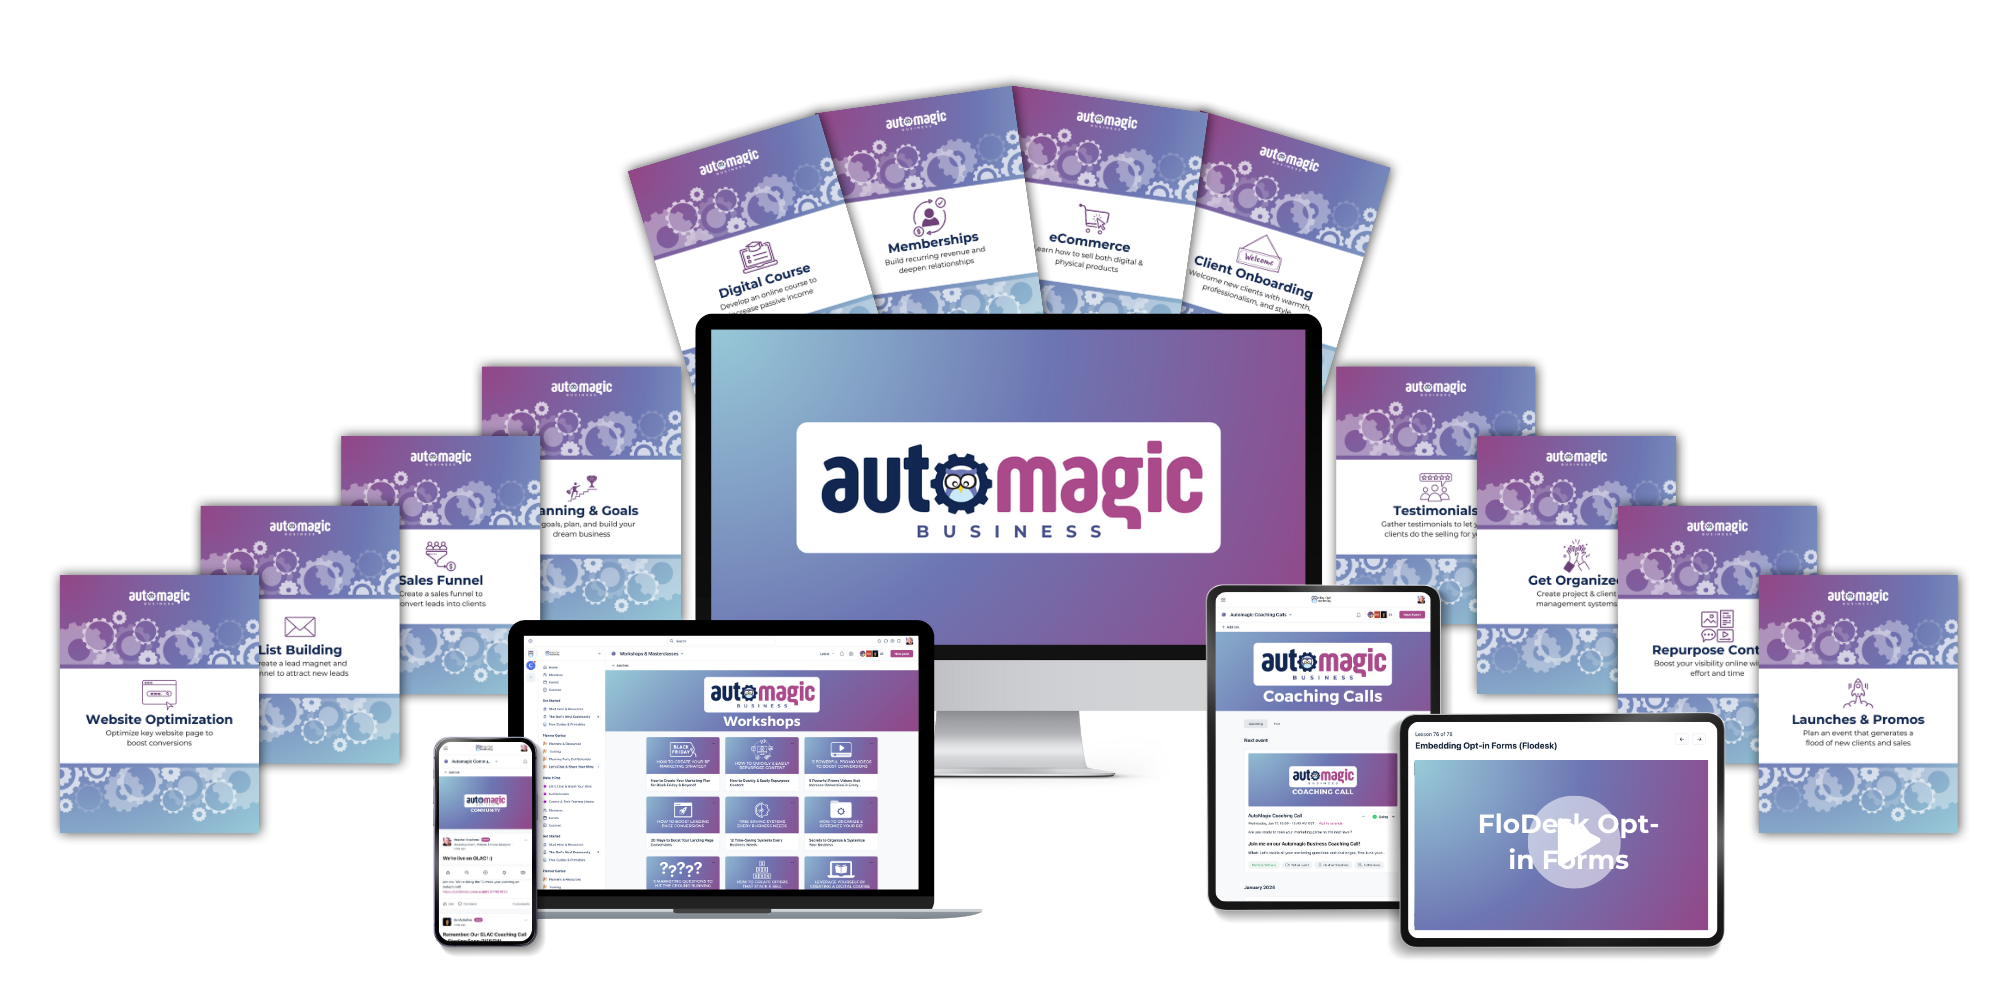 mockup collage of everything you get in the automagic business academy (workbooks, courses, live trainings, membership area, etc.)